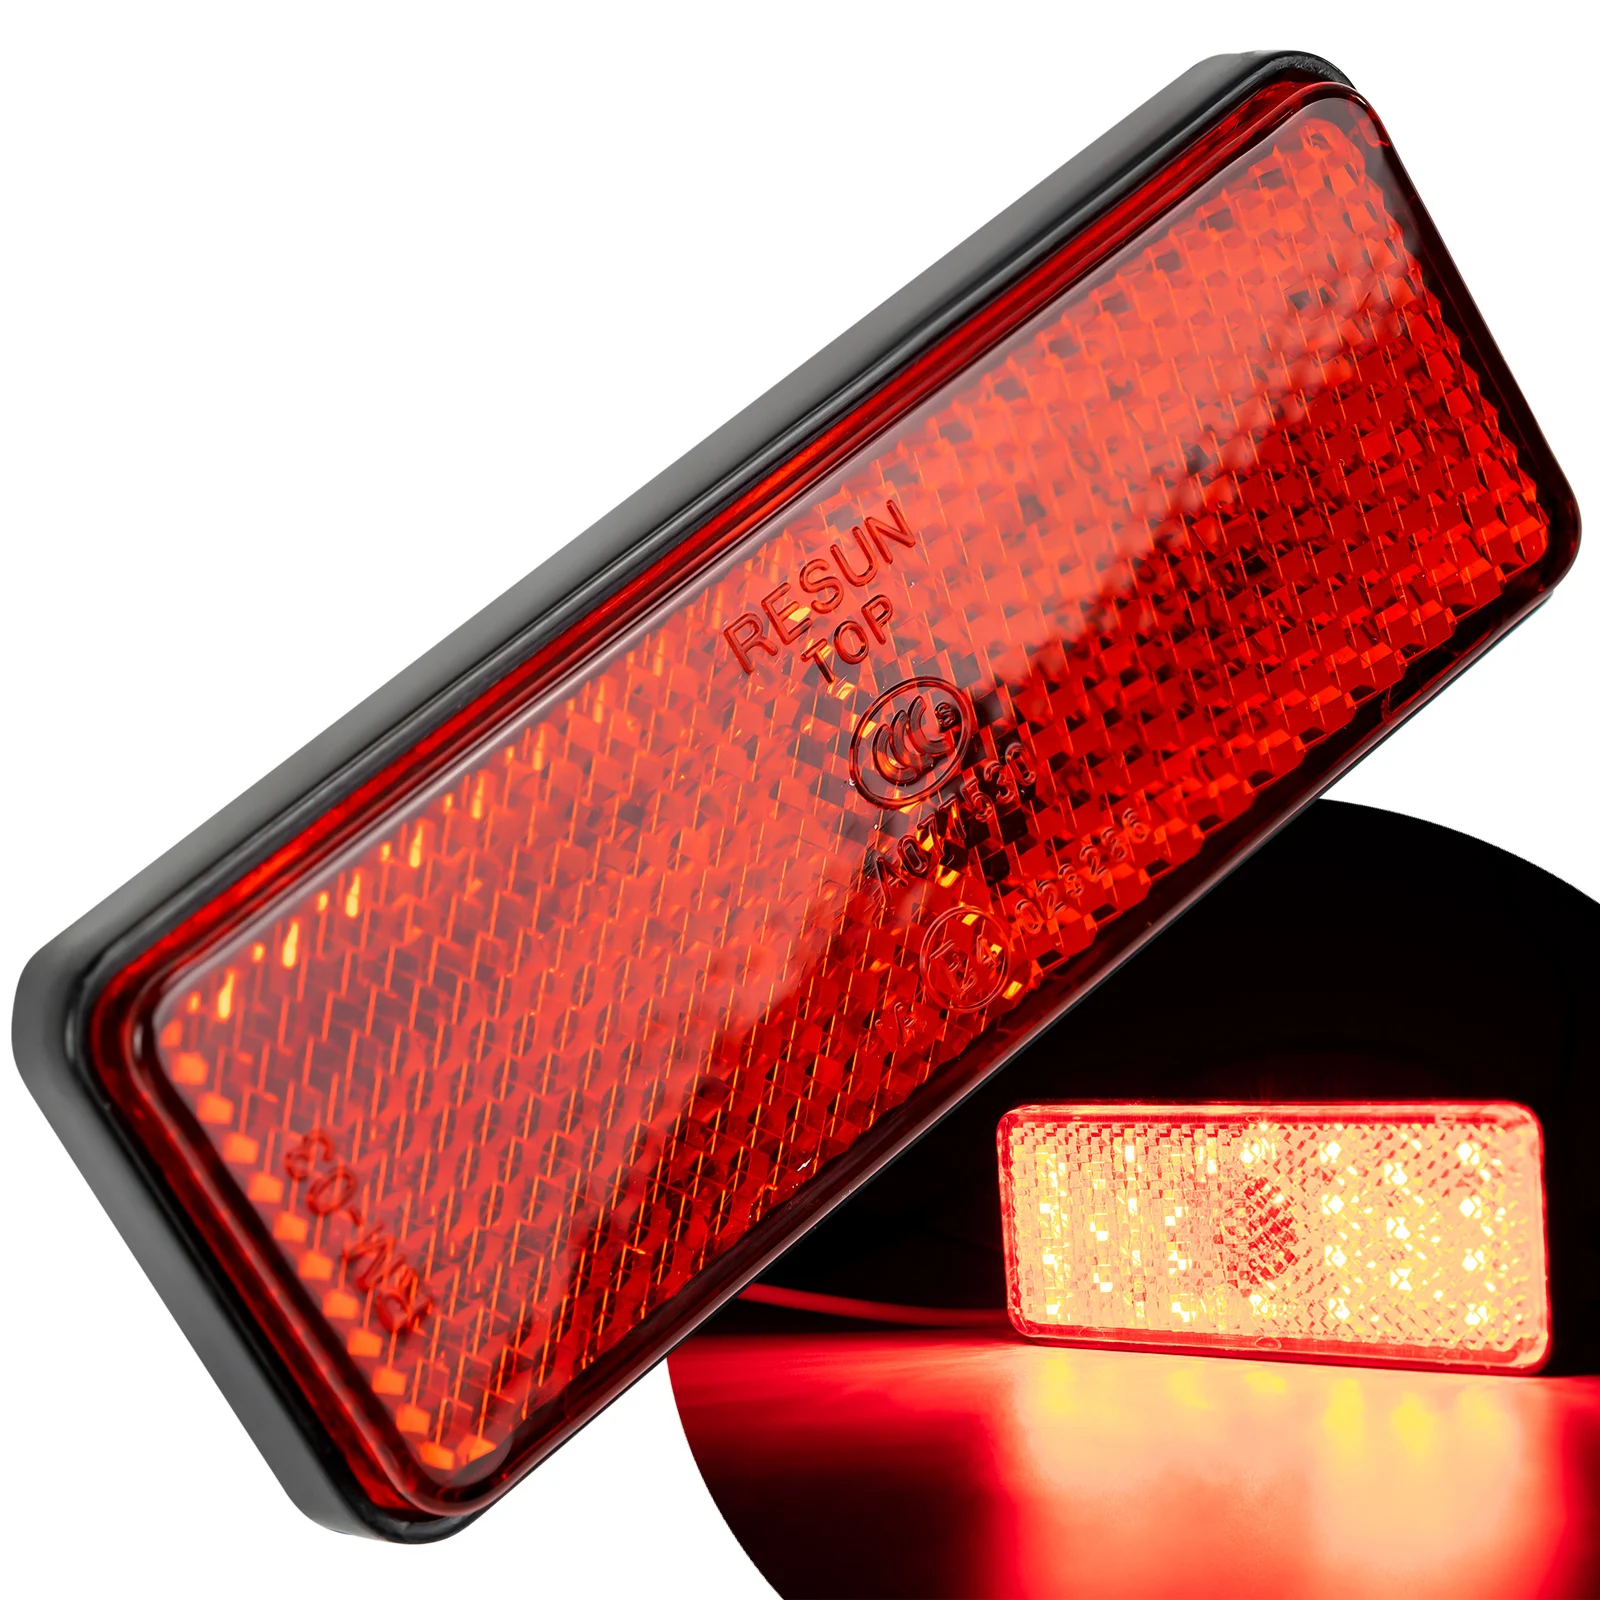 Yolu 2PCS Universal Rectangle Winker Tail Rear Stop Brake Warning LED Truck Light with Reflectors for Motorcycle ATV UTE Trailer RV Red 